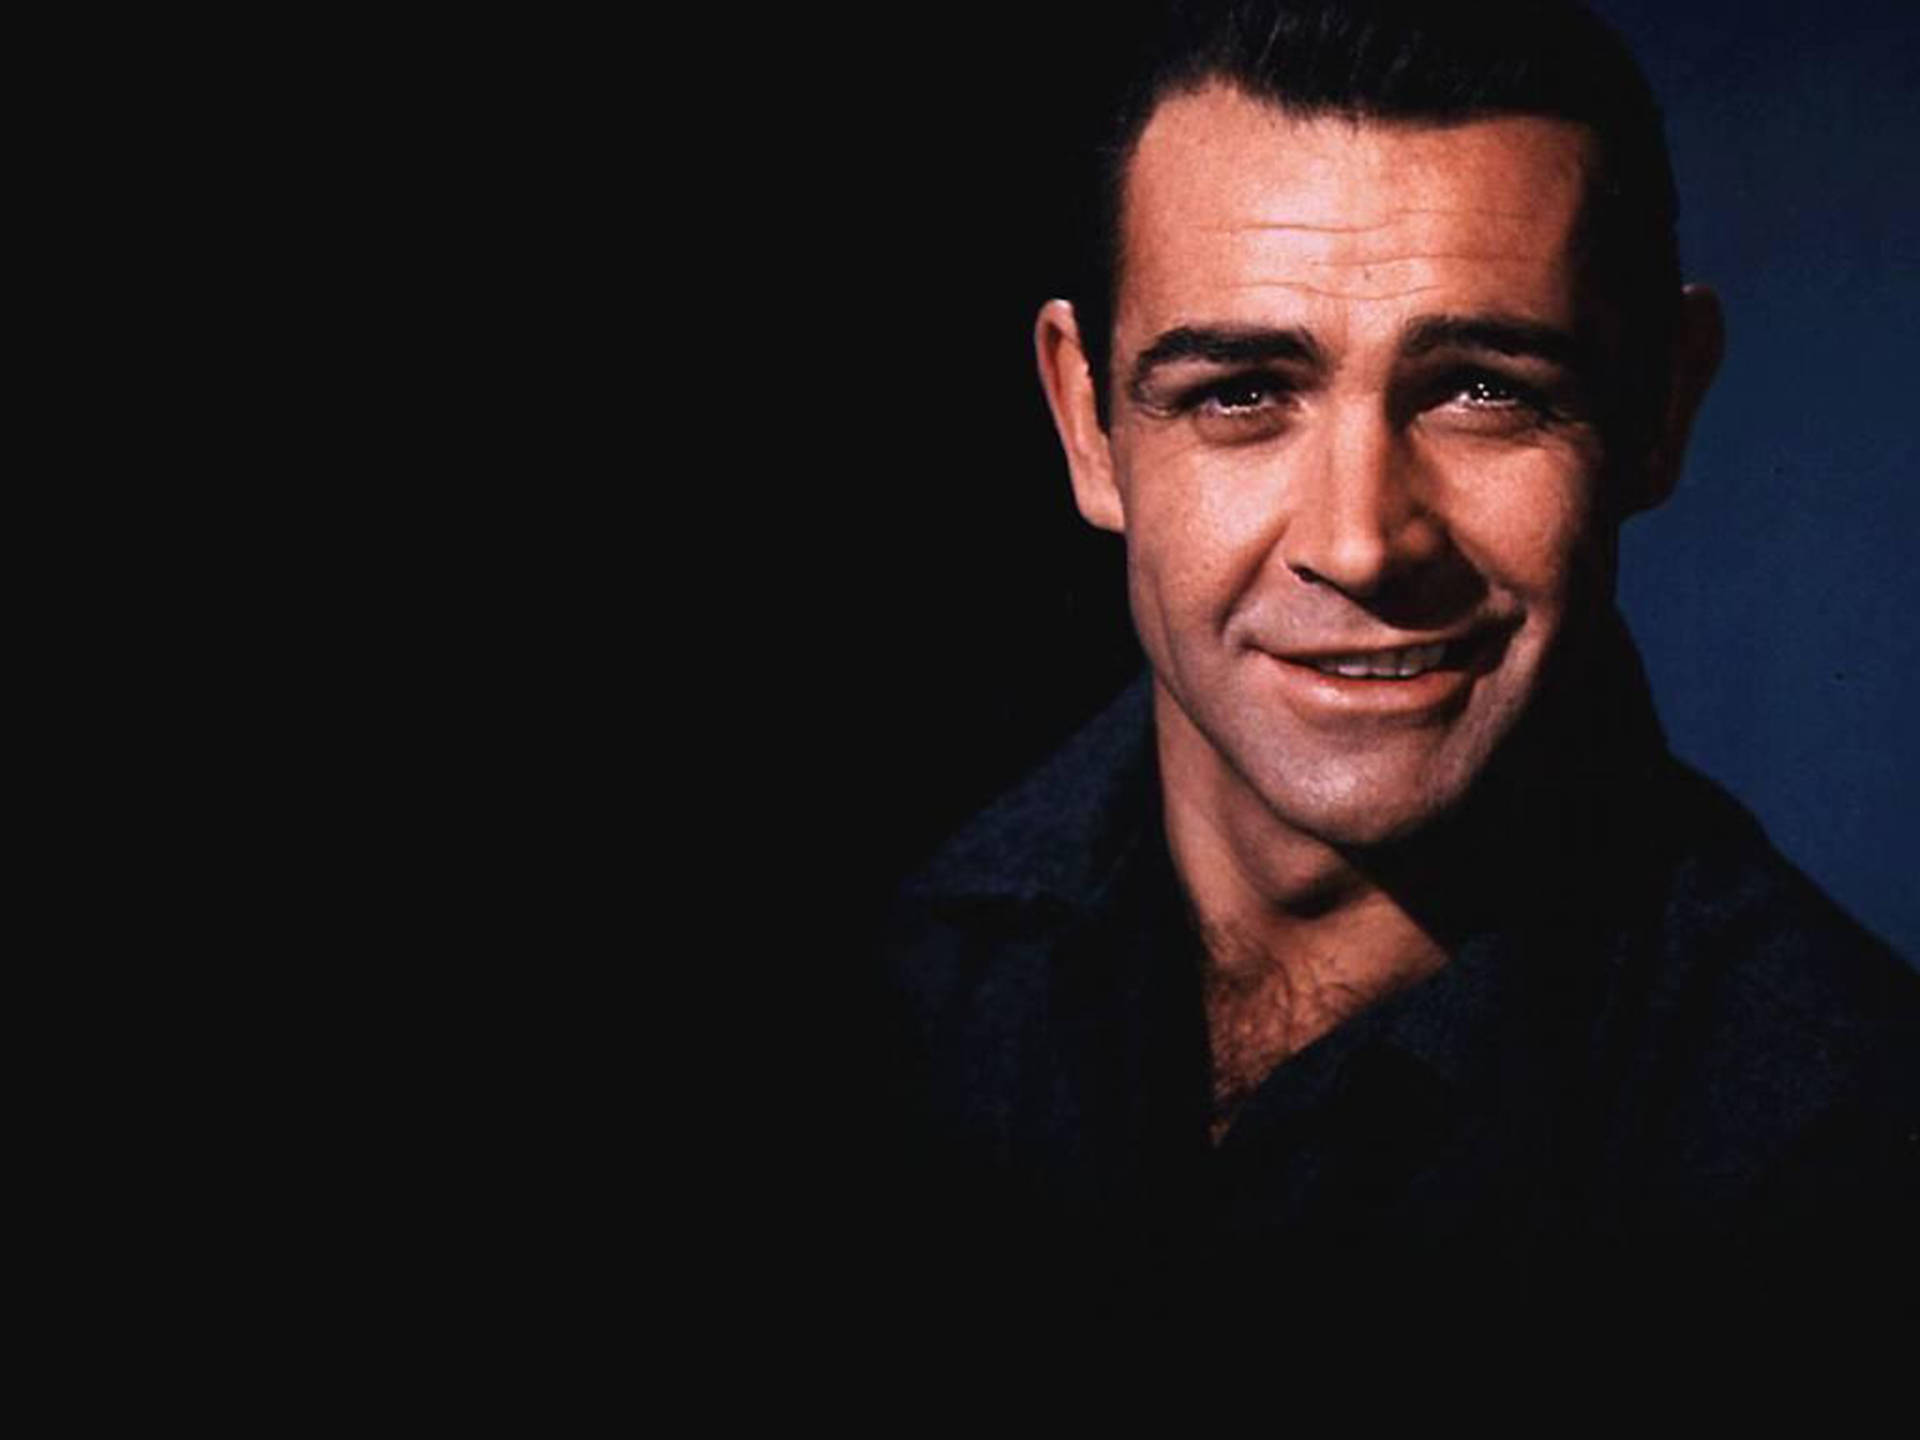 Charming Actor Sean Connery Background